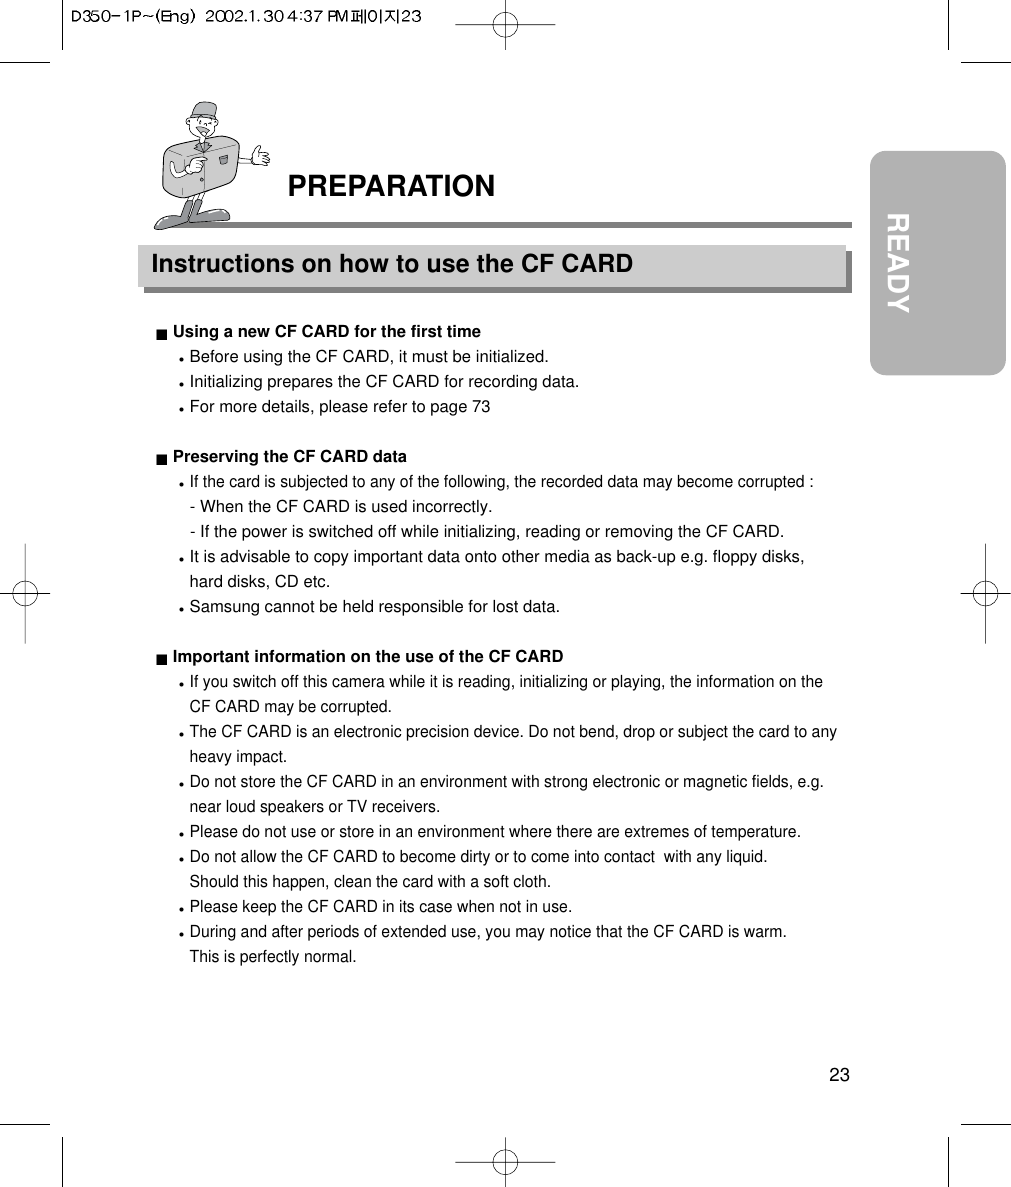 23READYPREPARATIONInstructions on how to use the CF CARDUsing a new CF CARD for the first timeBefore using the CF CARD, it must be initialized.Initializing prepares the CF CARD for recording data.For more details, please refer to page 73Preserving the CF CARD dataIf the card is subjected to any of the following, the recorded data may become corrupted :- When the CF CARD is used incorrectly.- If the power is switched off while initializing, reading or removing the CF CARD.It is advisable to copy important data onto other media as back-up e.g. floppy disks,hard disks, CD etc.Samsung cannot be held responsible for lost data.Important information on the use of the CF CARDIf you switch off this camera while it is reading, initializing or playing, the information on theCF CARD may be corrupted.The CF CARD is an electronic precision device. Do not bend, drop or subject the card to anyheavy impact.Do not store the CF CARD in an environment with strong electronic or magnetic fields, e.g.near loud speakers or TV receivers.Please do not use or store in an environment where there are extremes of temperature.Do not allow the CF CARD to become dirty or to come into contact  with any liquid. Should this happen, clean the card with a soft cloth.Please keep the CF CARD in its case when not in use.During and after periods of extended use, you may notice that the CF CARD is warm. This is perfectly normal.